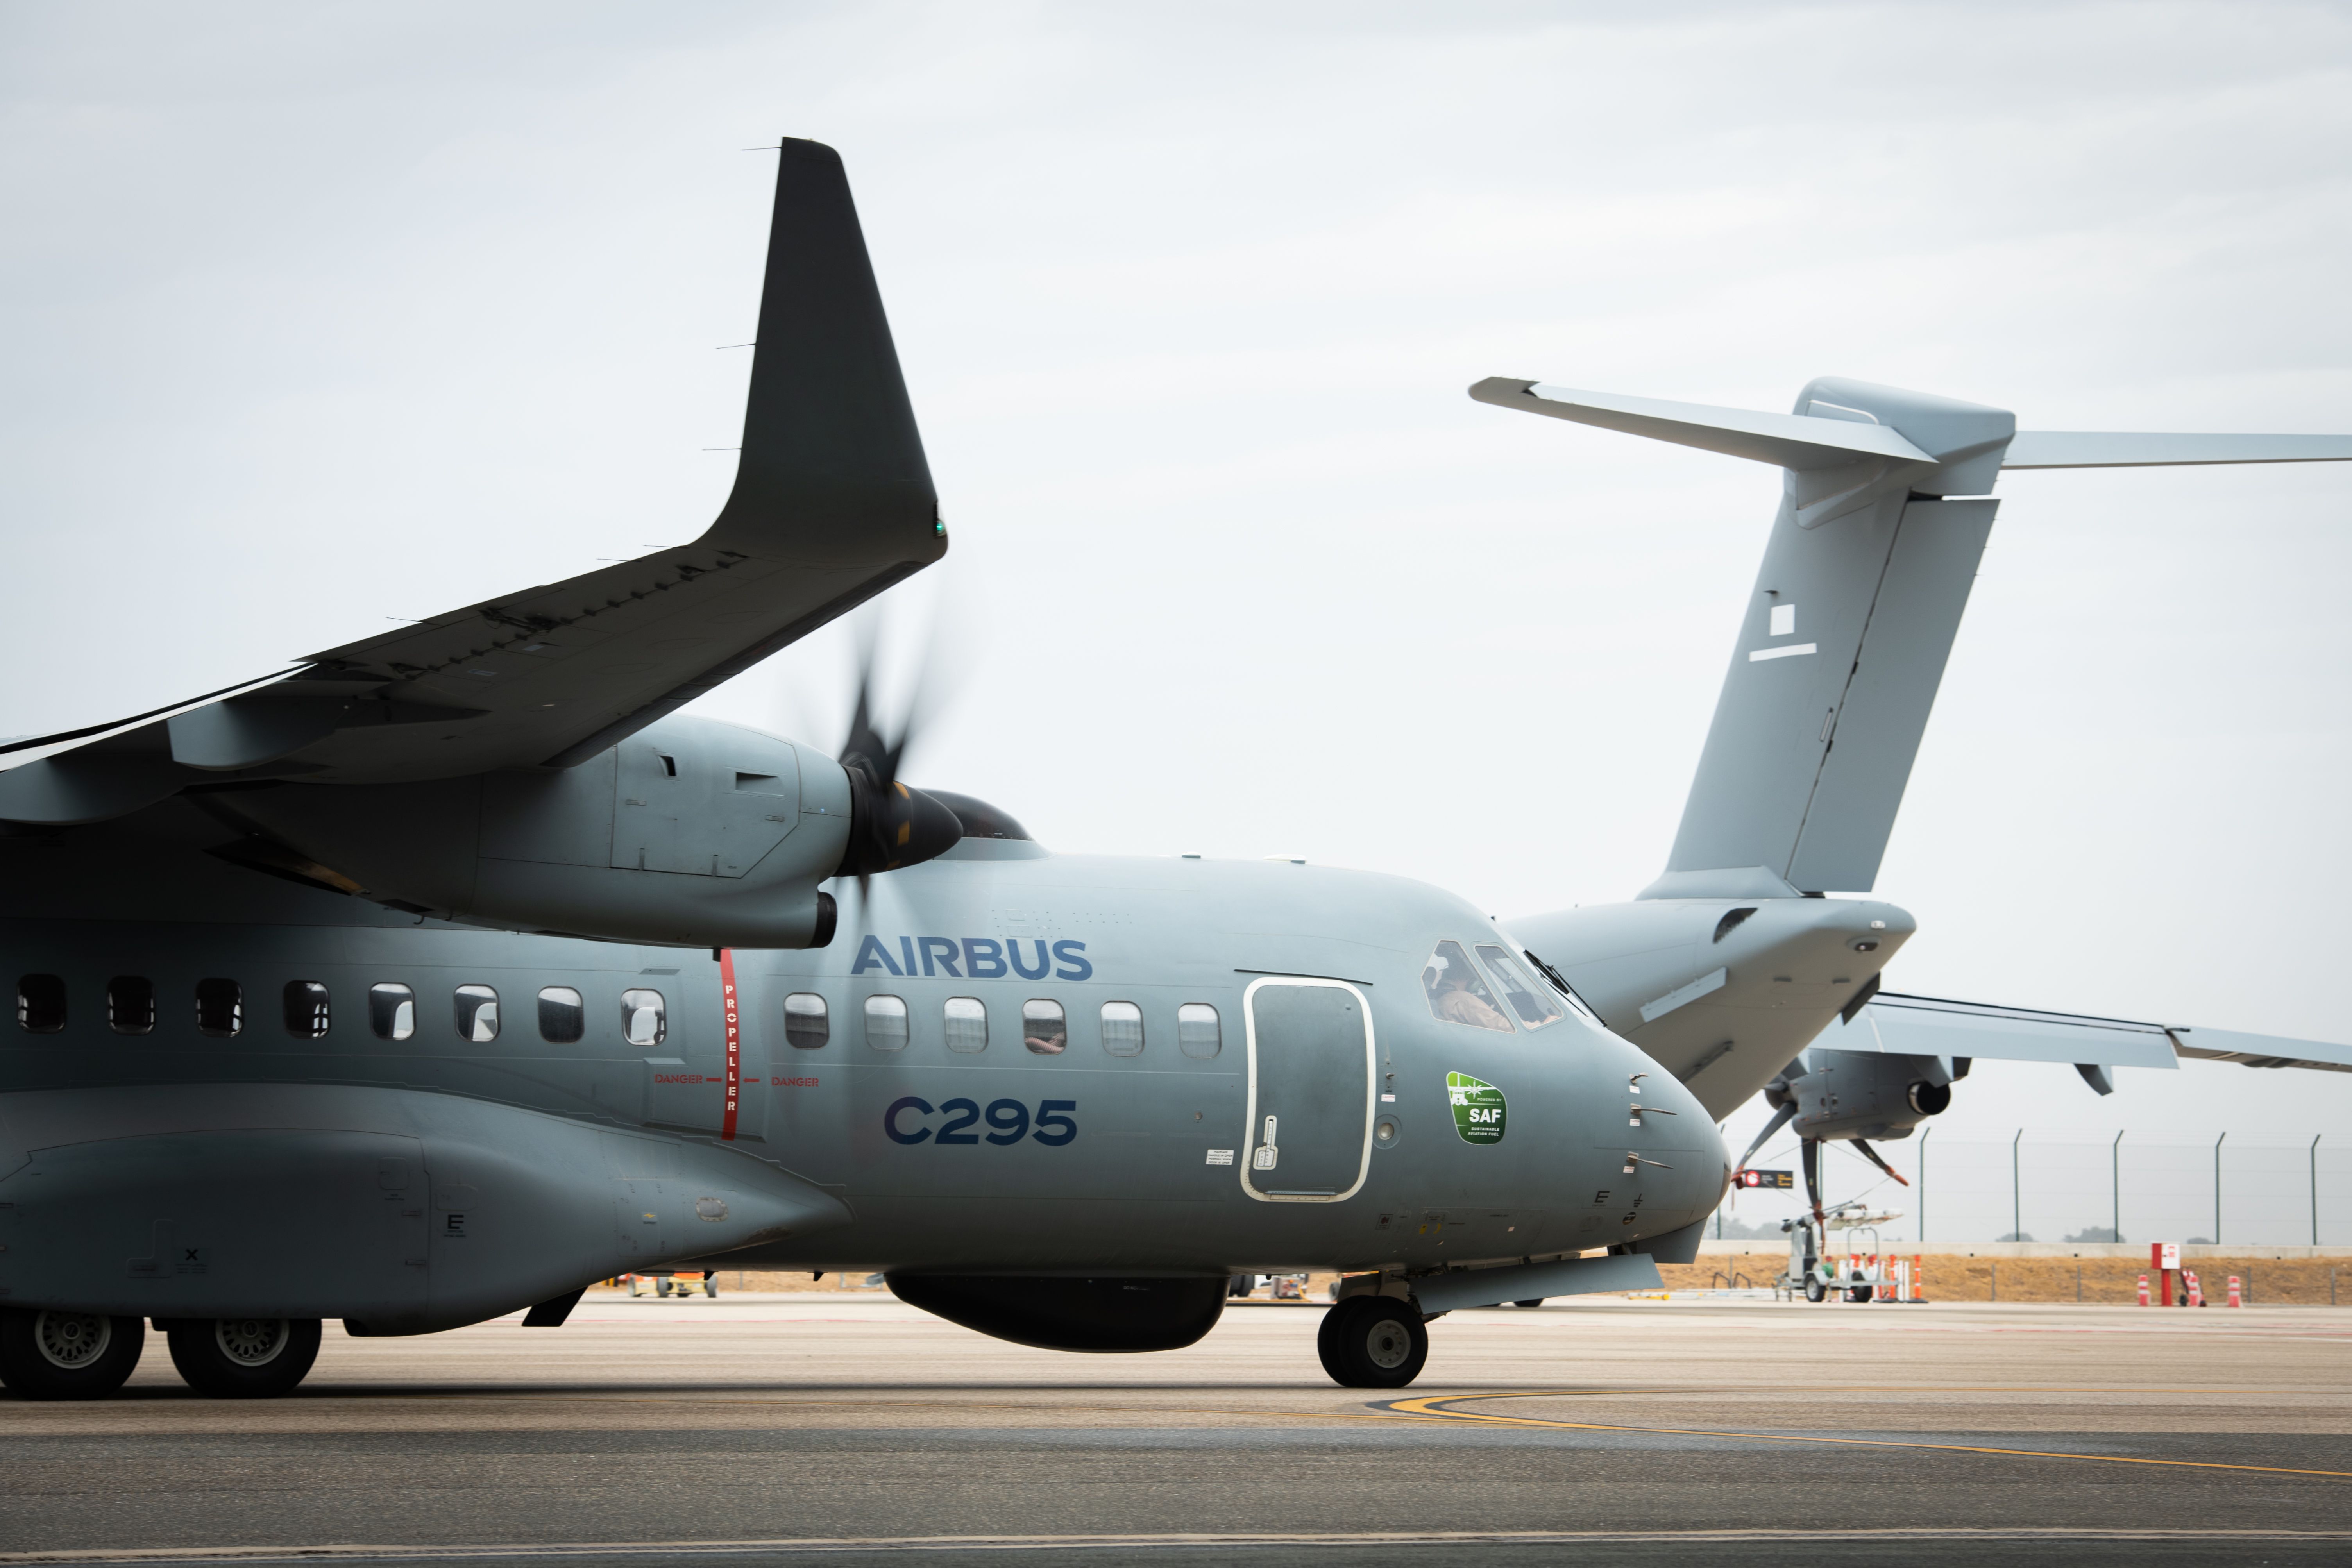 C295 military aircraft from Airbus on apron